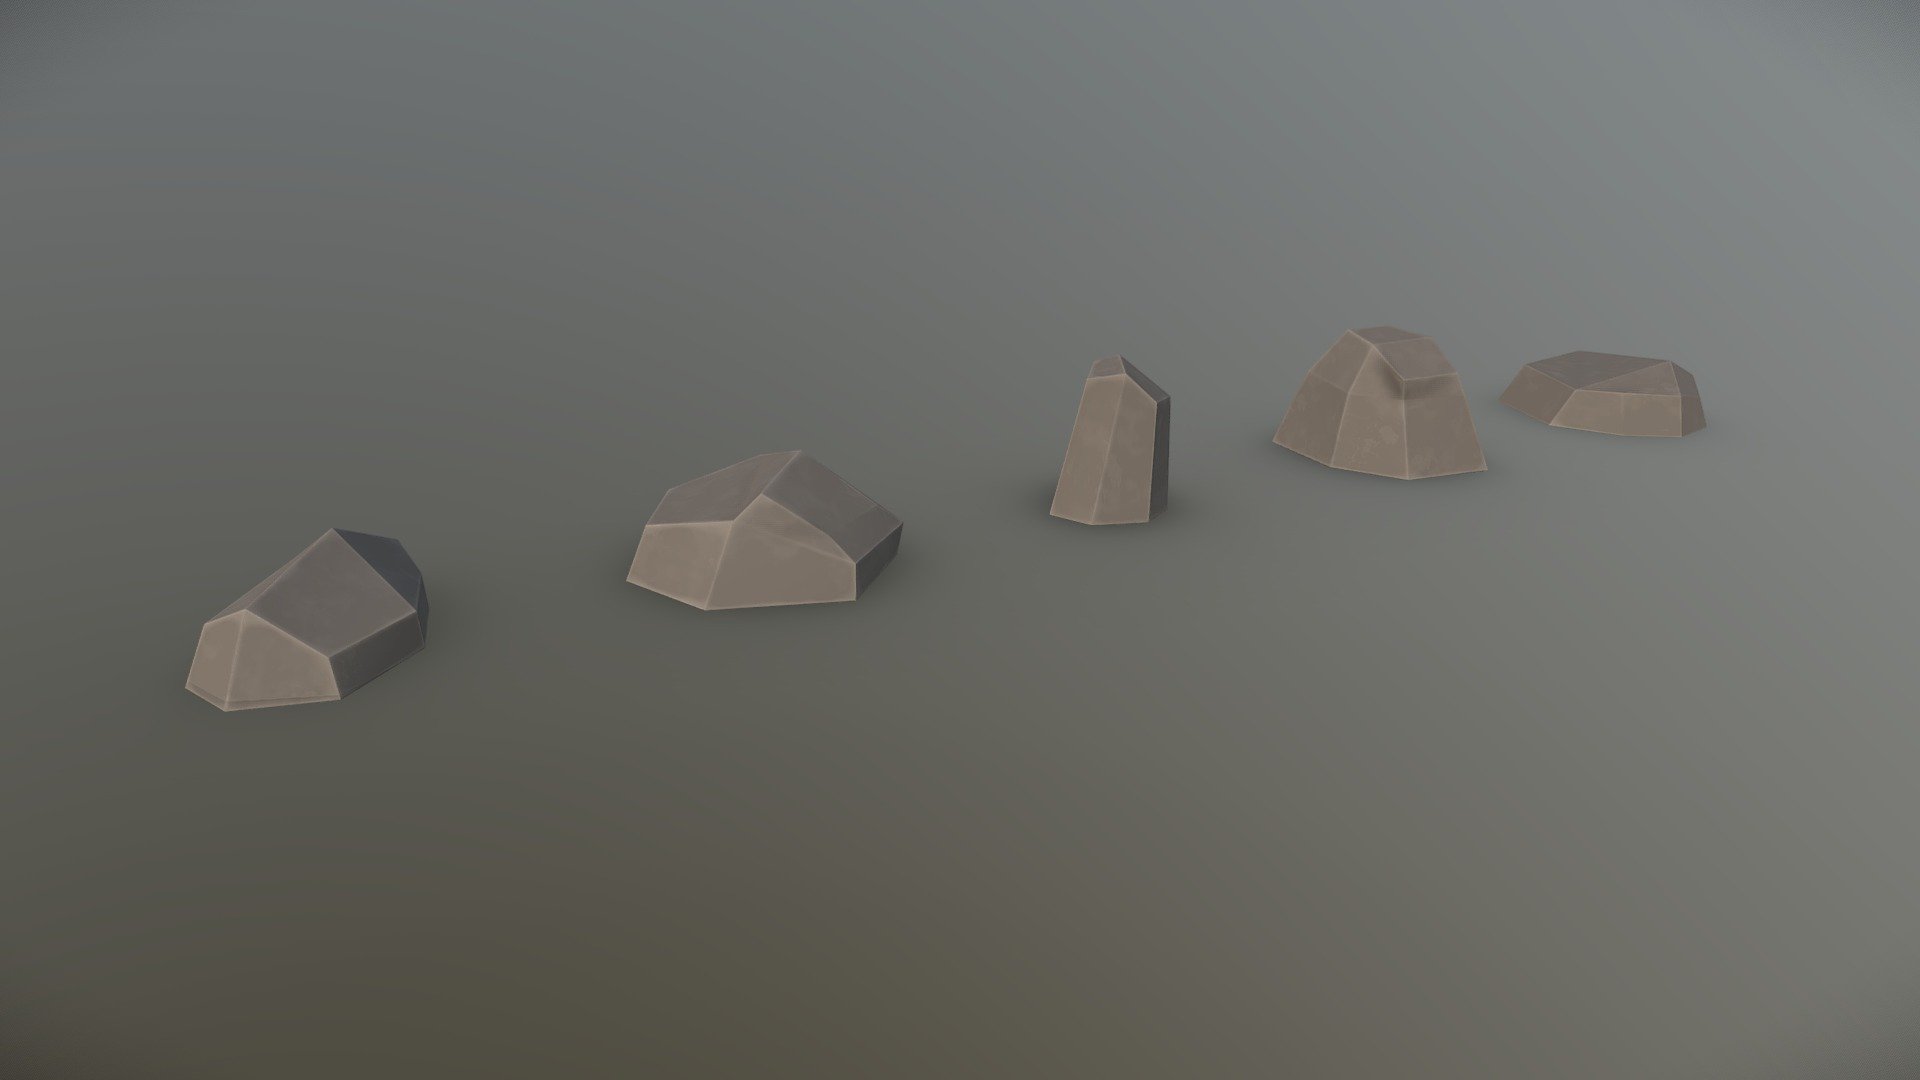 A set of 5 low poly rocks that I have created as part of my current project. These assets were created using Maya 2019 and textured using Substance Painter.

These come to a total of 168 tris, with each rock being around 32 tris each 3d model